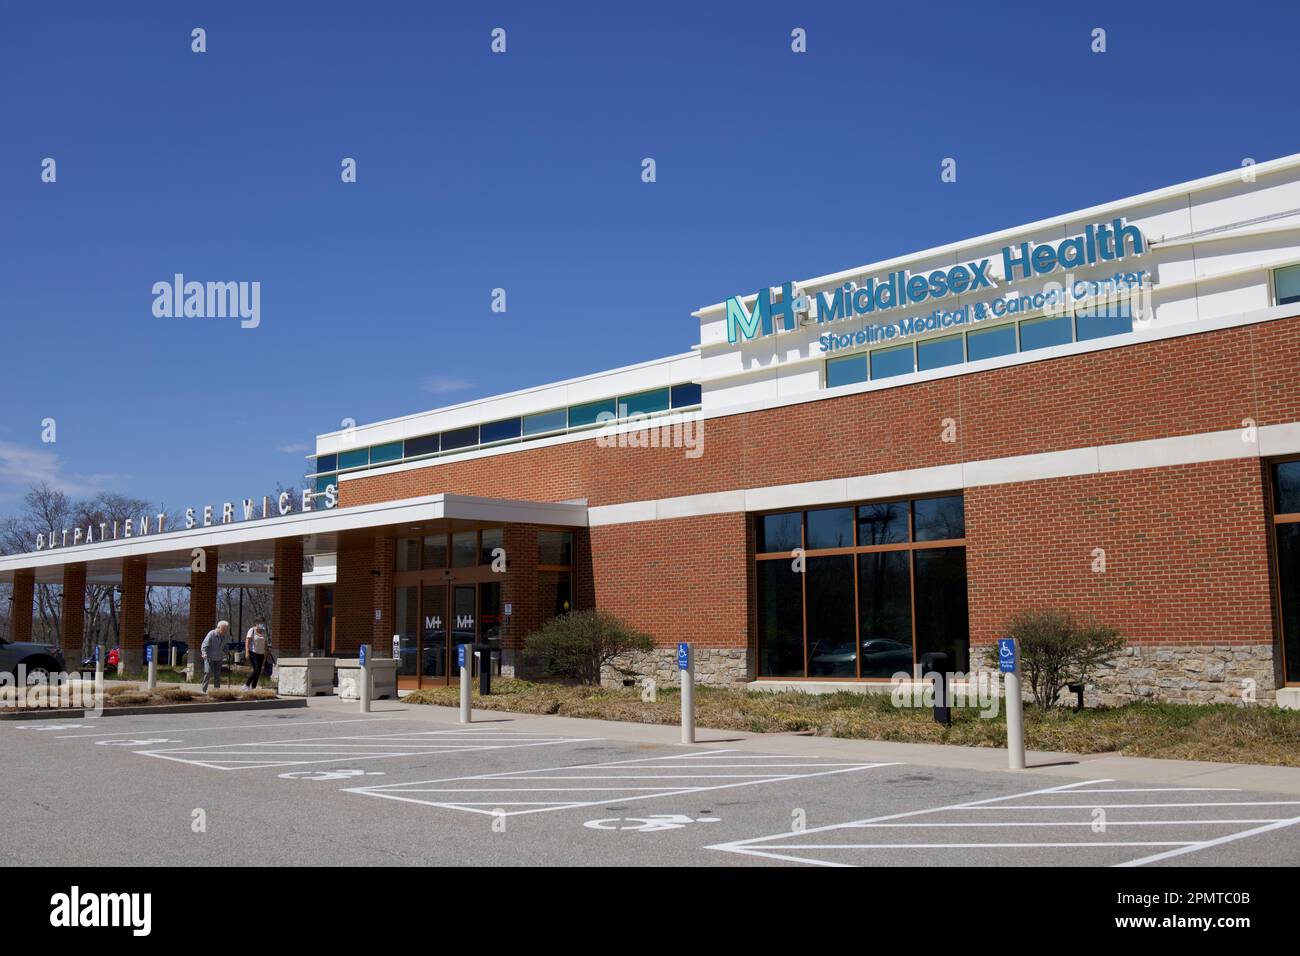 Entrance for Outpatient Services at Middlesex Health Shoreline Medical and Cancer Center. Exterior with handicap parking in front. People walking in. Stock Photo